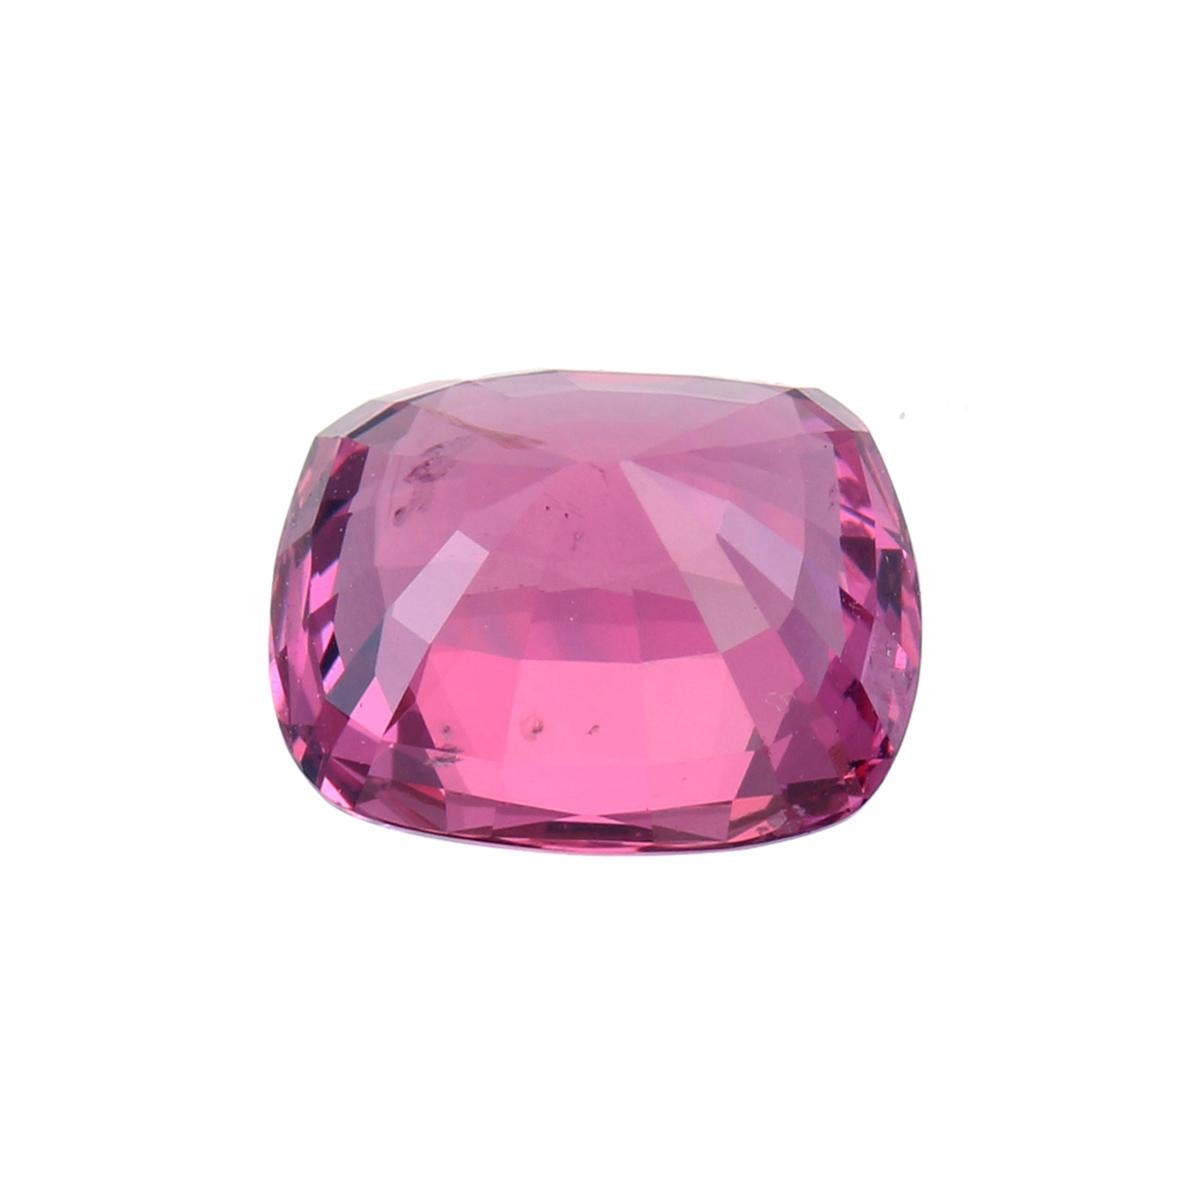 The discovery of intense red and pink spinel in the Mahenge District of Tanzania in 2007 hit the gem world by storm and thrust Spinel into the limelight. Most of the Mahenge deposit is mined out now but occasionally some nice pieces are found such